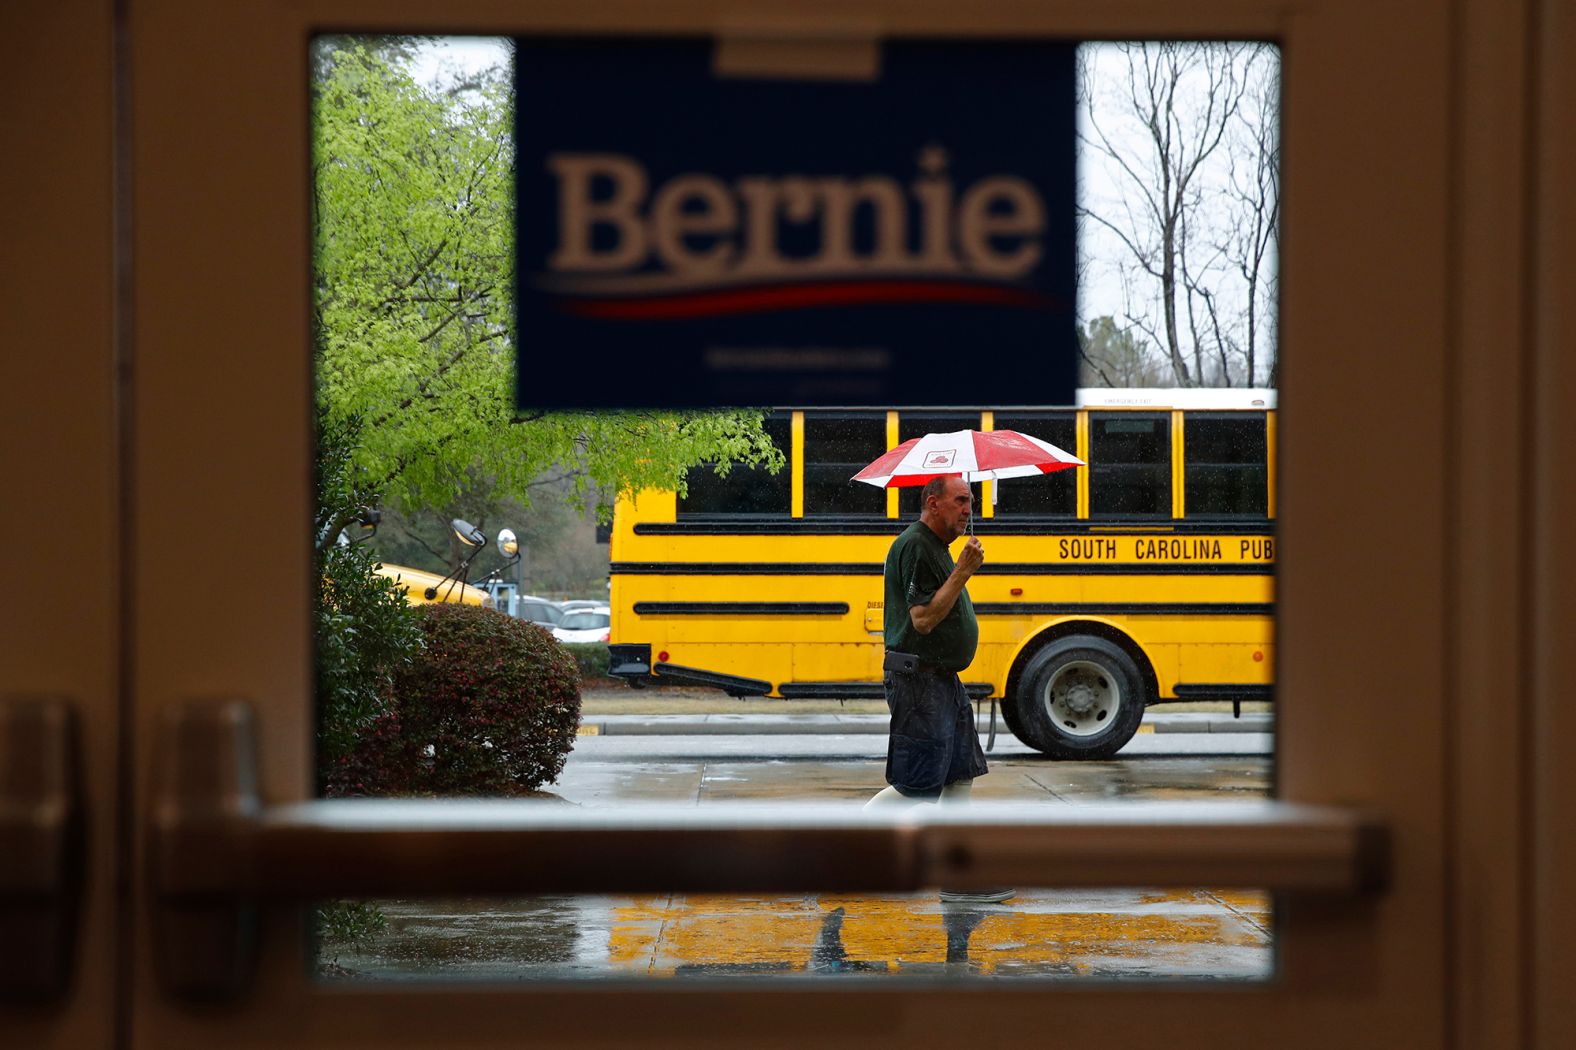 A man arrives at a Sanders campaign event in North Charleston on Wednesday.